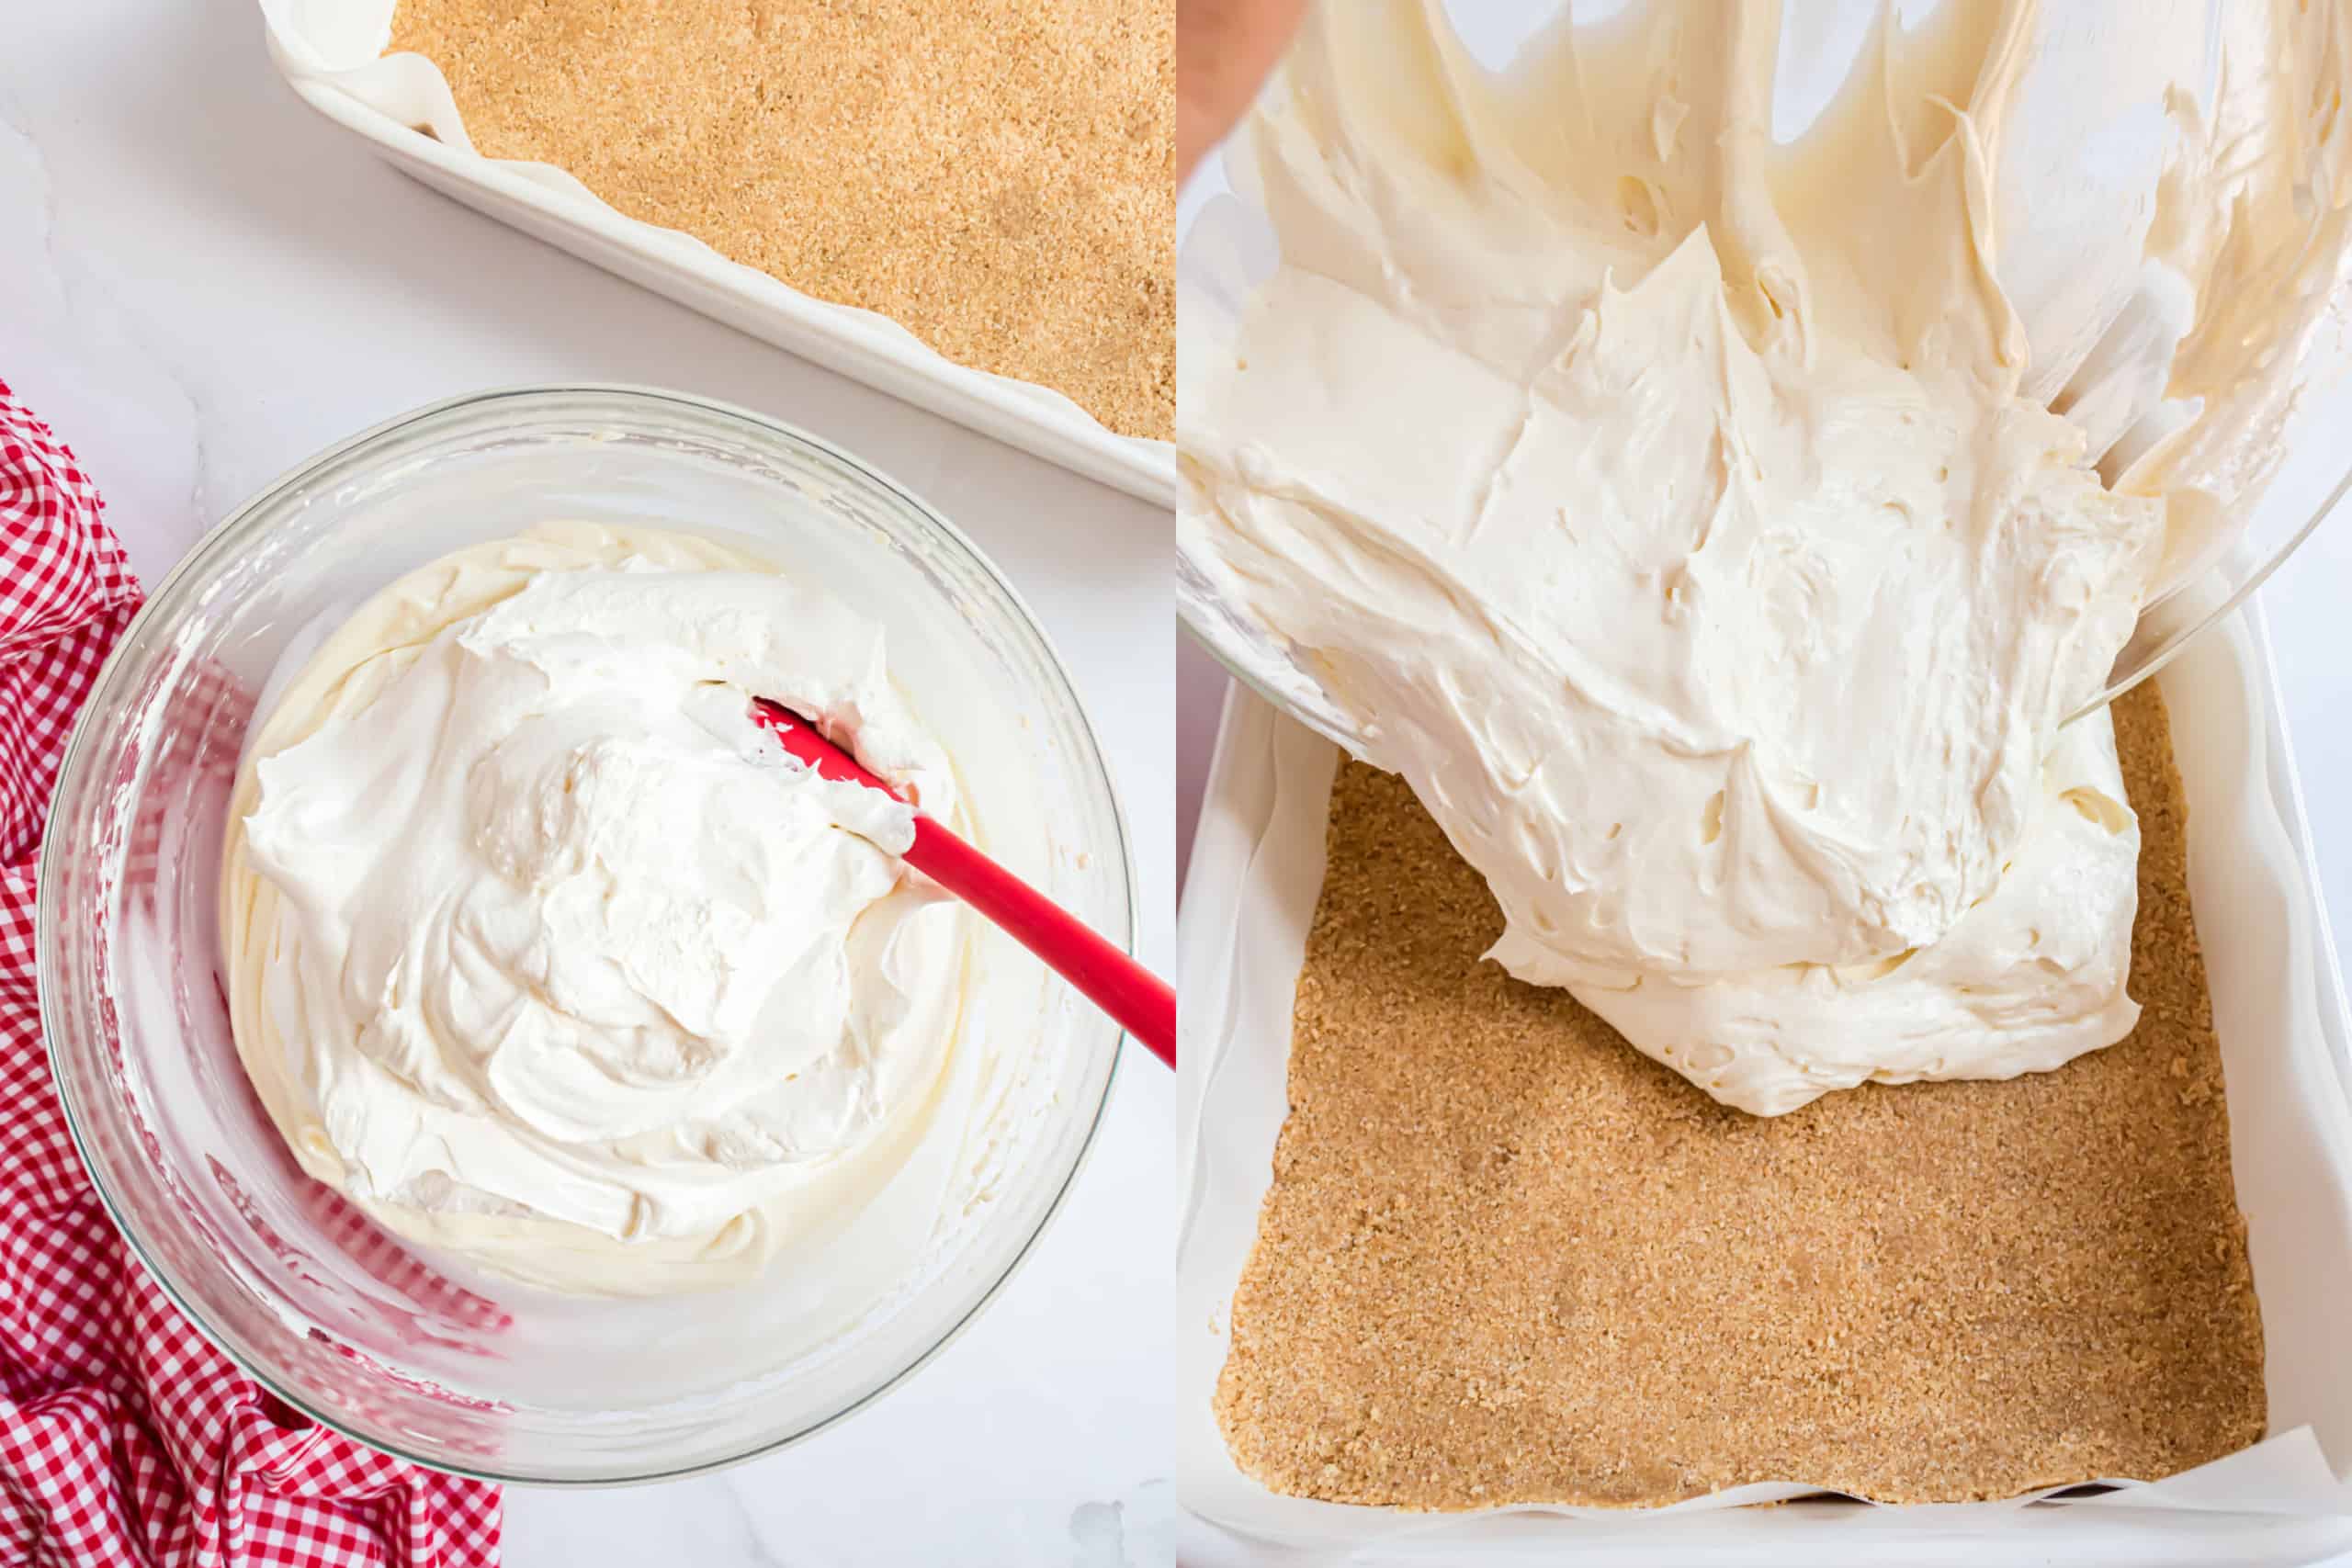 Step by step photos showing how to make cheesecake filling.